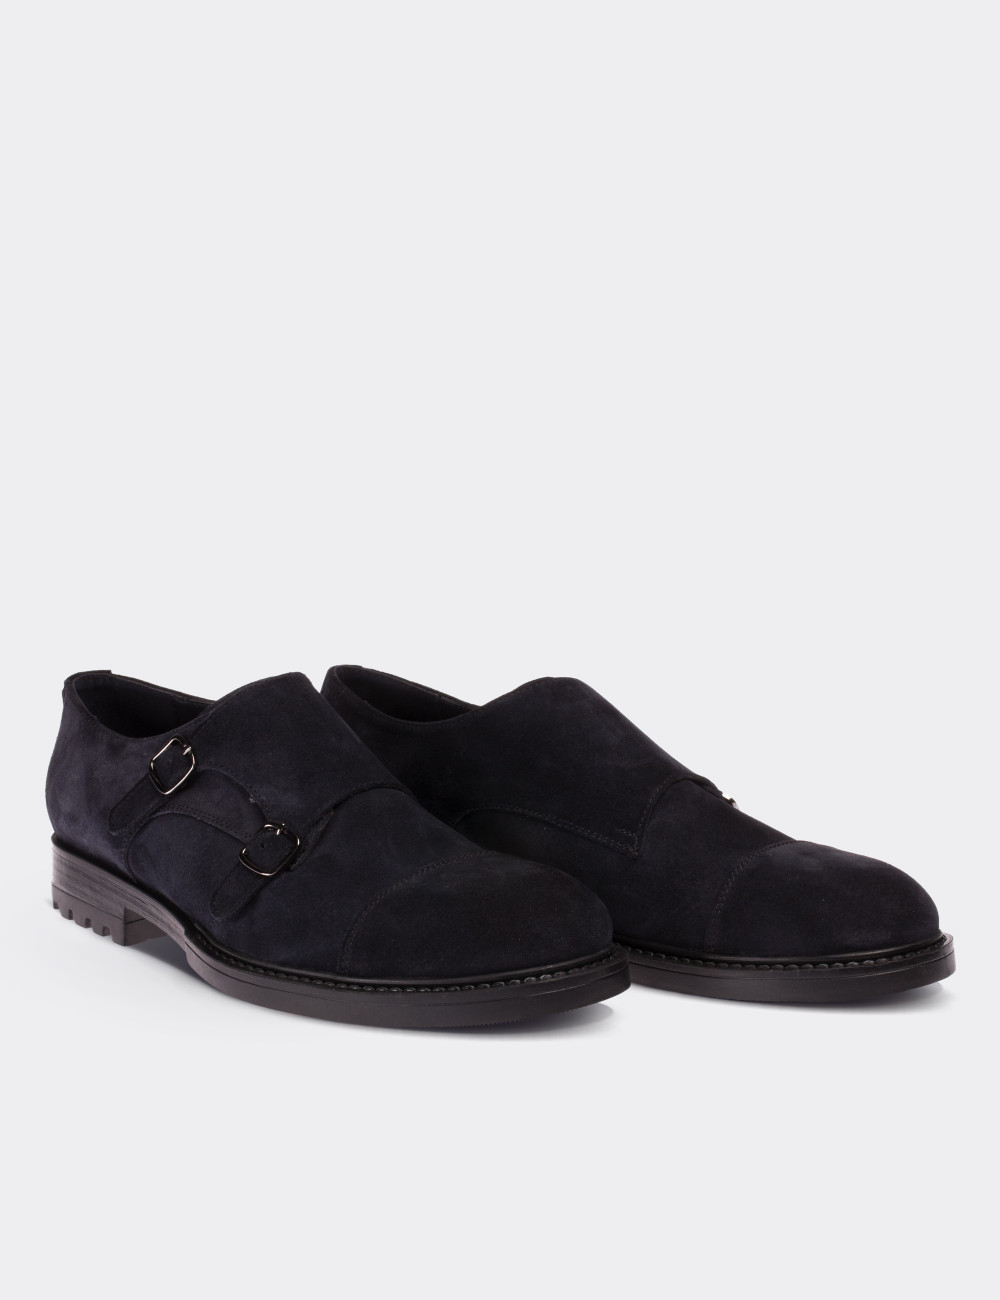 Navy Suede Leather Monk Straps Shoes - 01625MLCVC01